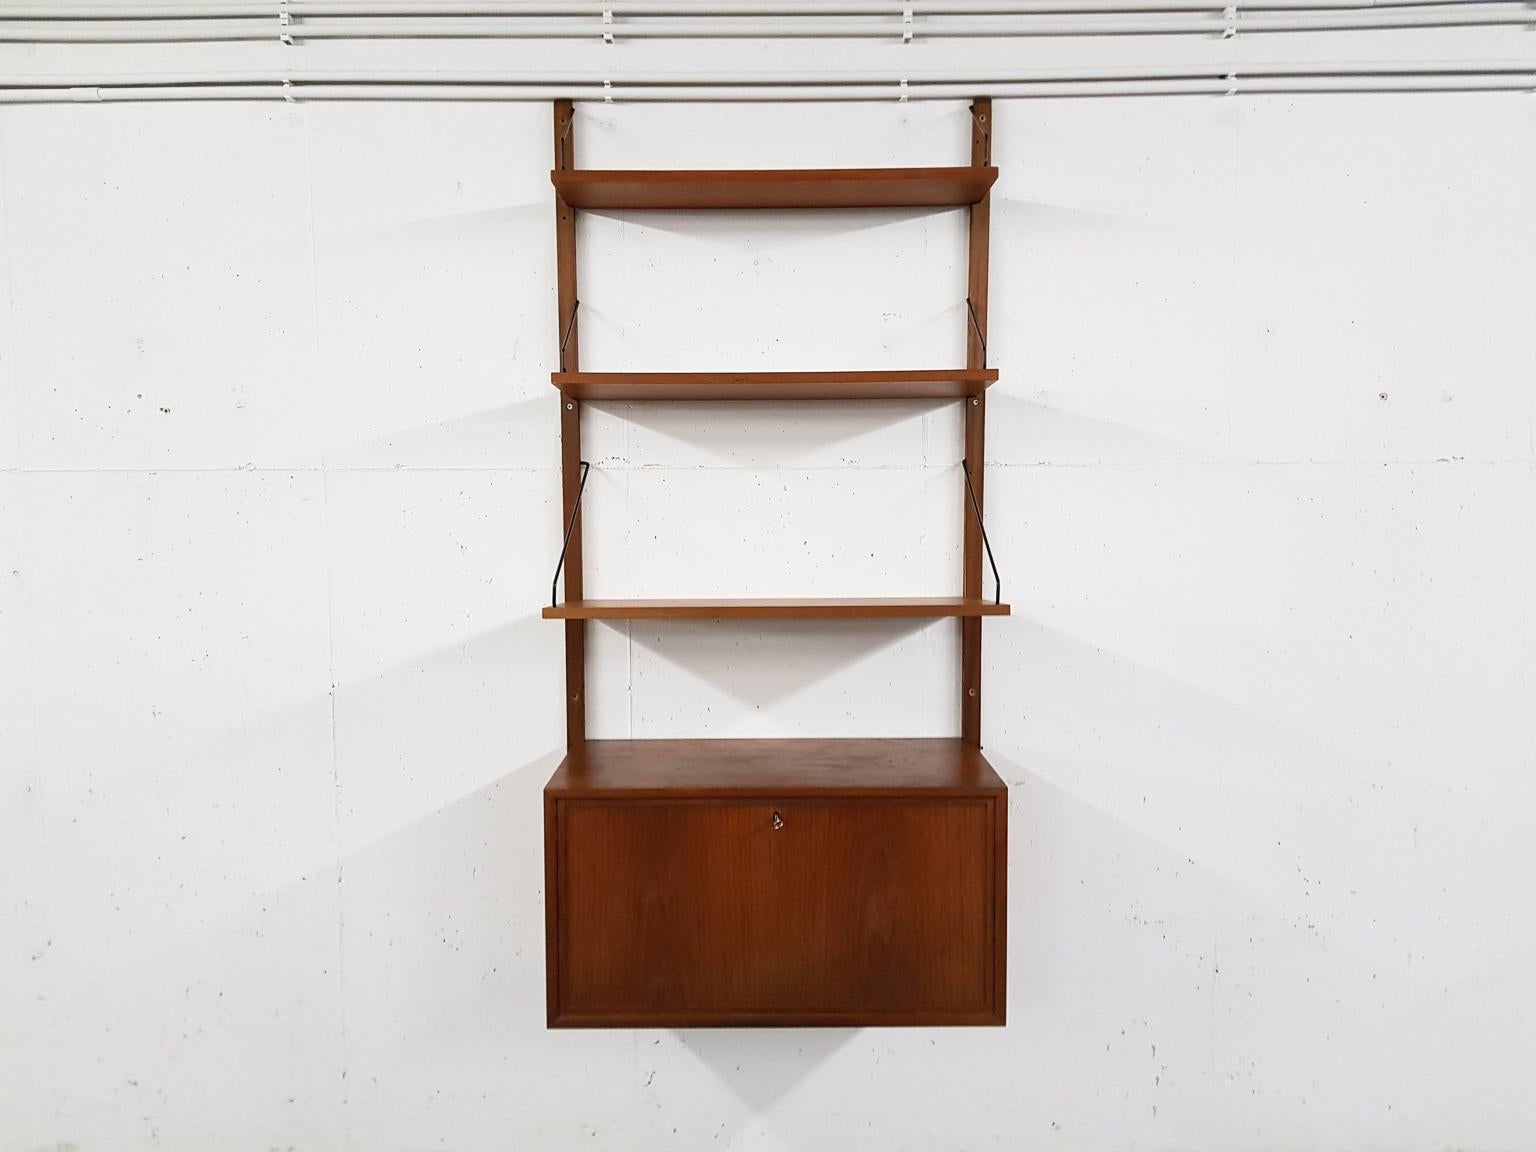 Danish design wall system or shelving unit with a dry bar by Poul Cadovius for Royal System, designed in Denmark in 1948.

This item has a dry bar or cabinet, which features a mirror, bottle rack and interior light.

When you ask someone to